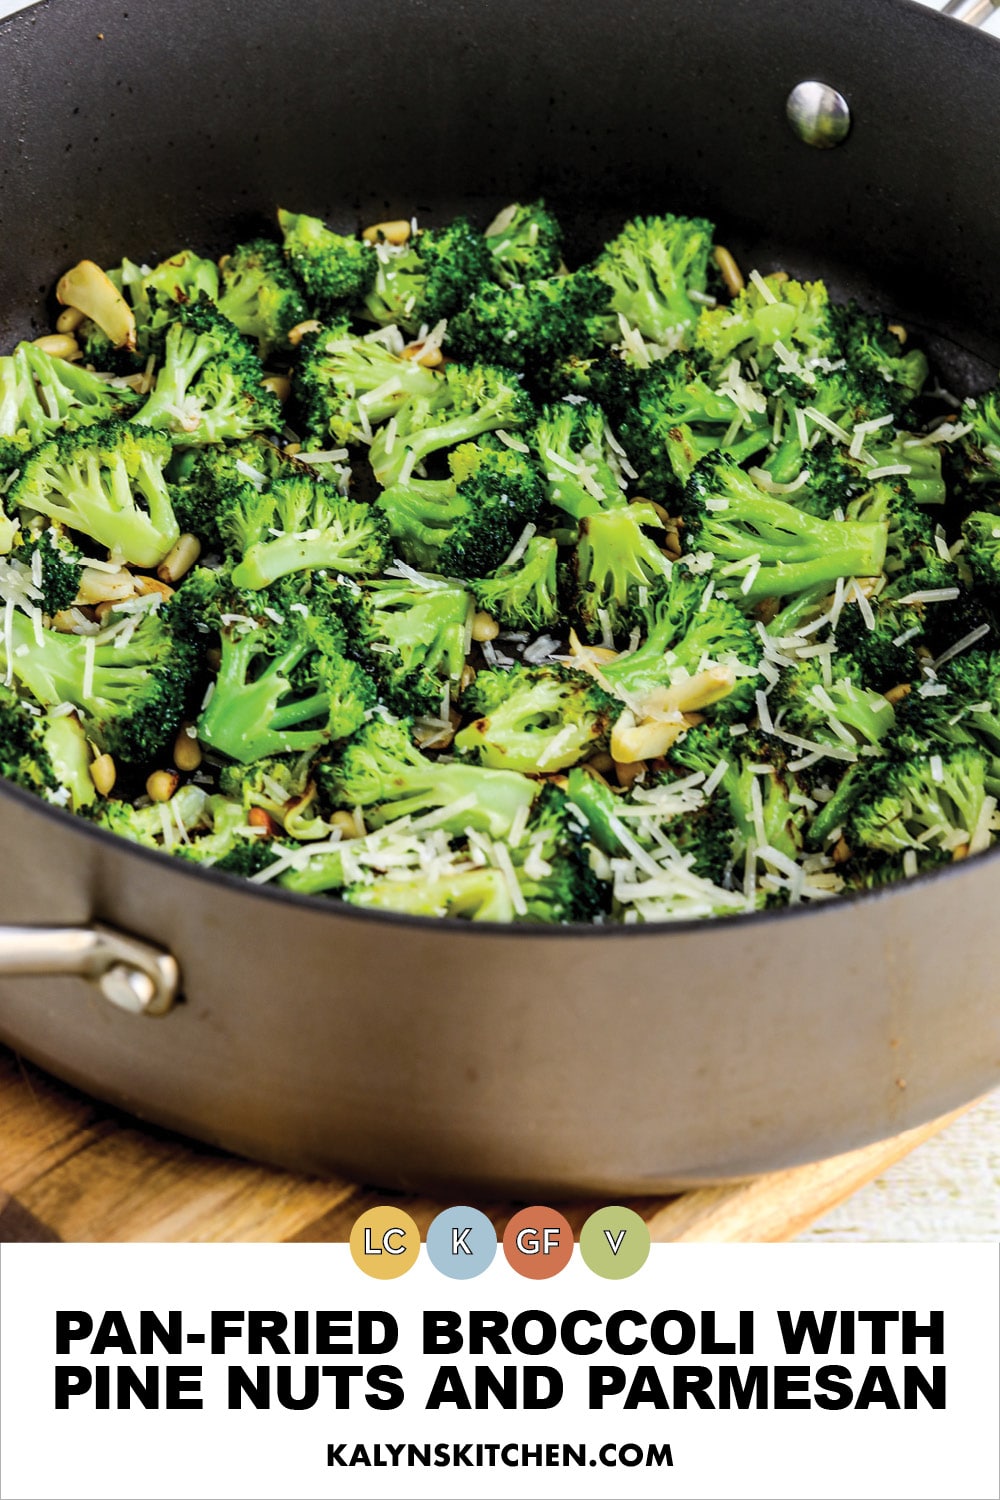 Pinterest image of Pan-Fried Broccoli with Pine Nuts and Parmesan